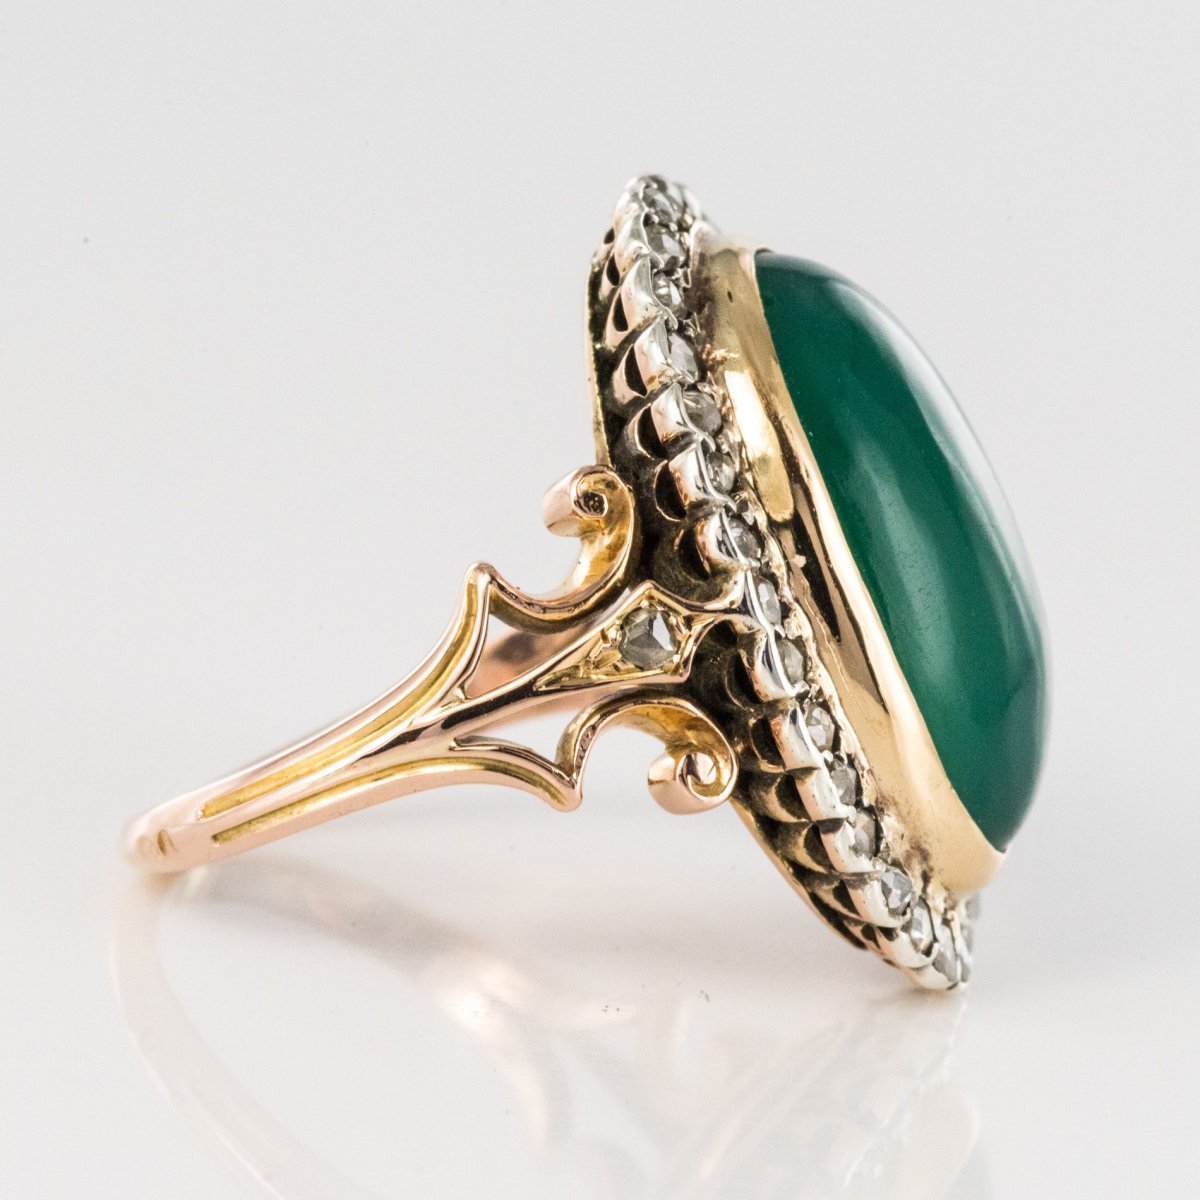 Old Green Agate And Rose Cut Diamond Ring-photo-5